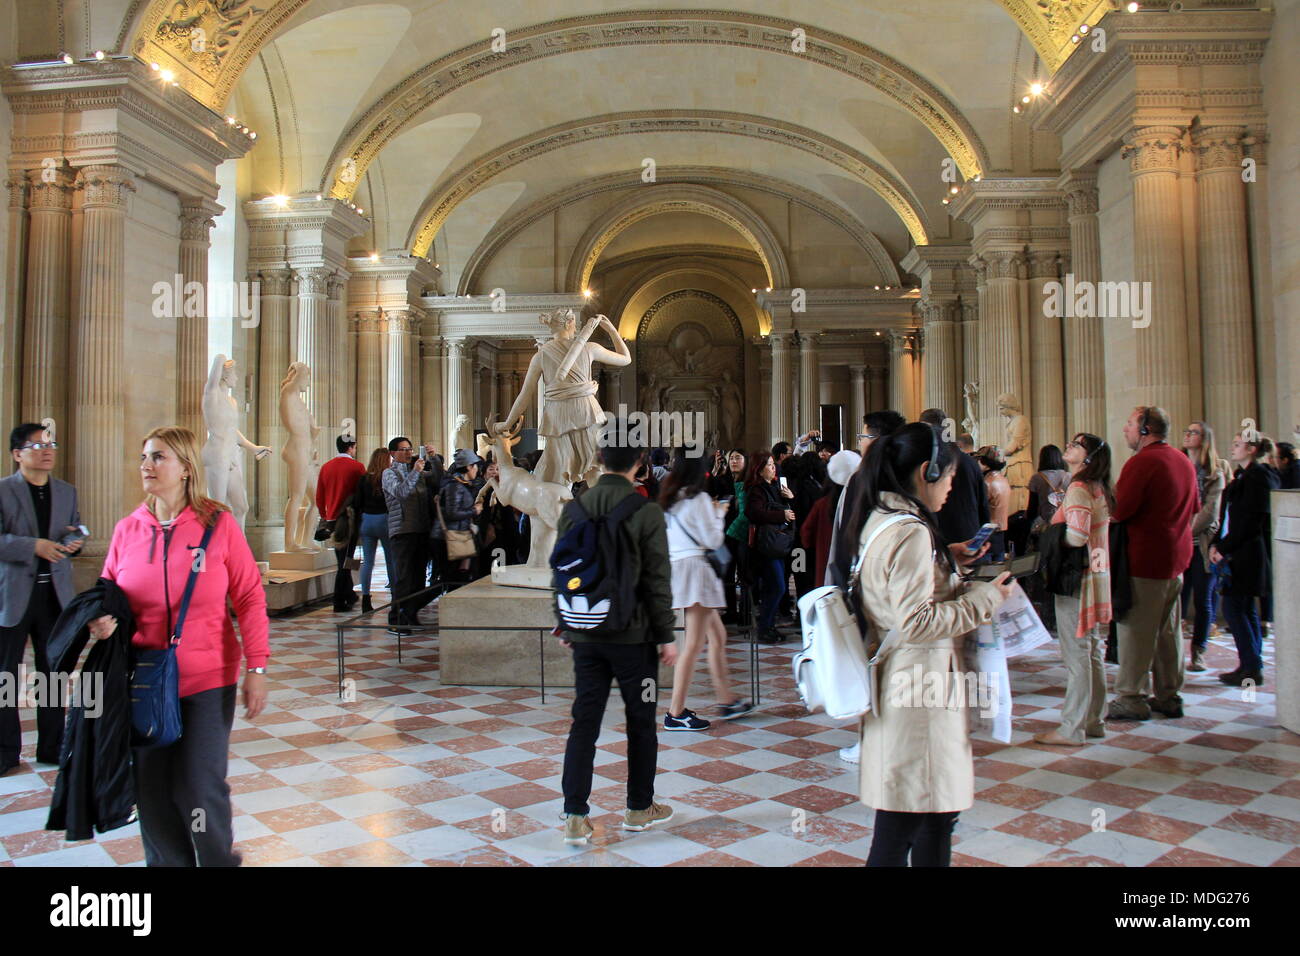 Visitors from all over the world walk through the halls and rooms of The Louvre, Paris, France. Stock Photo